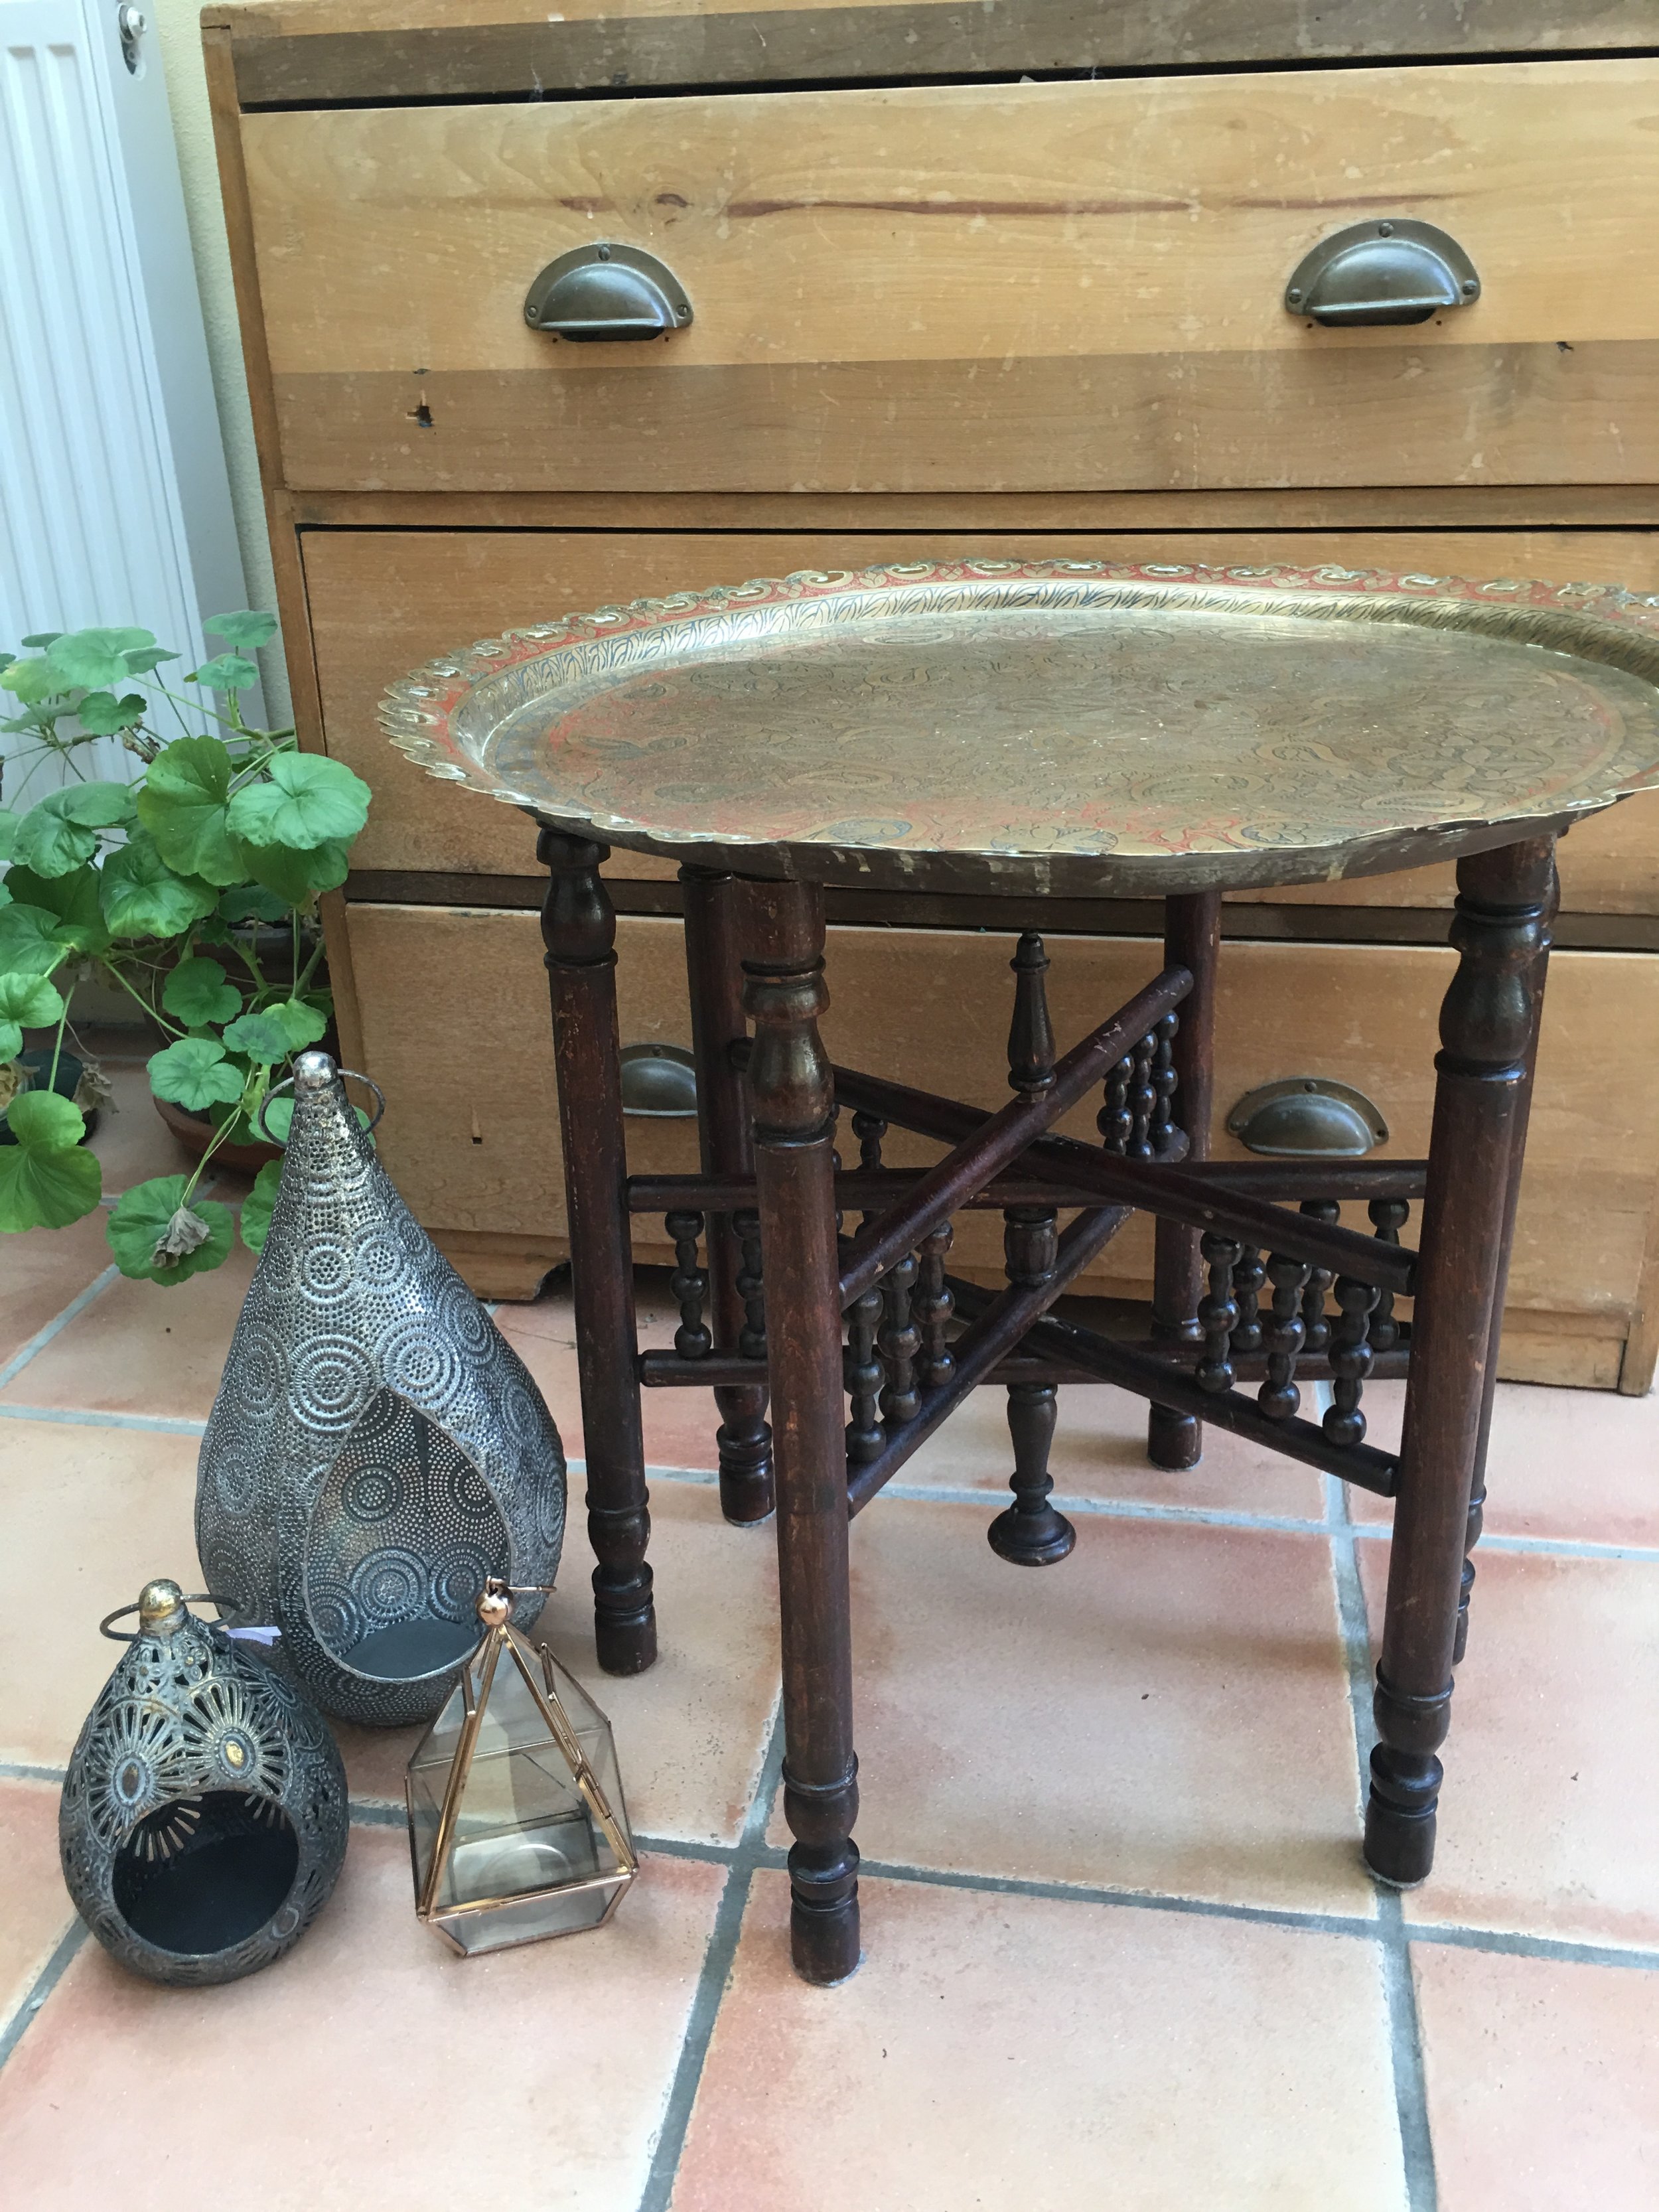 Moroccan Brass Table £15